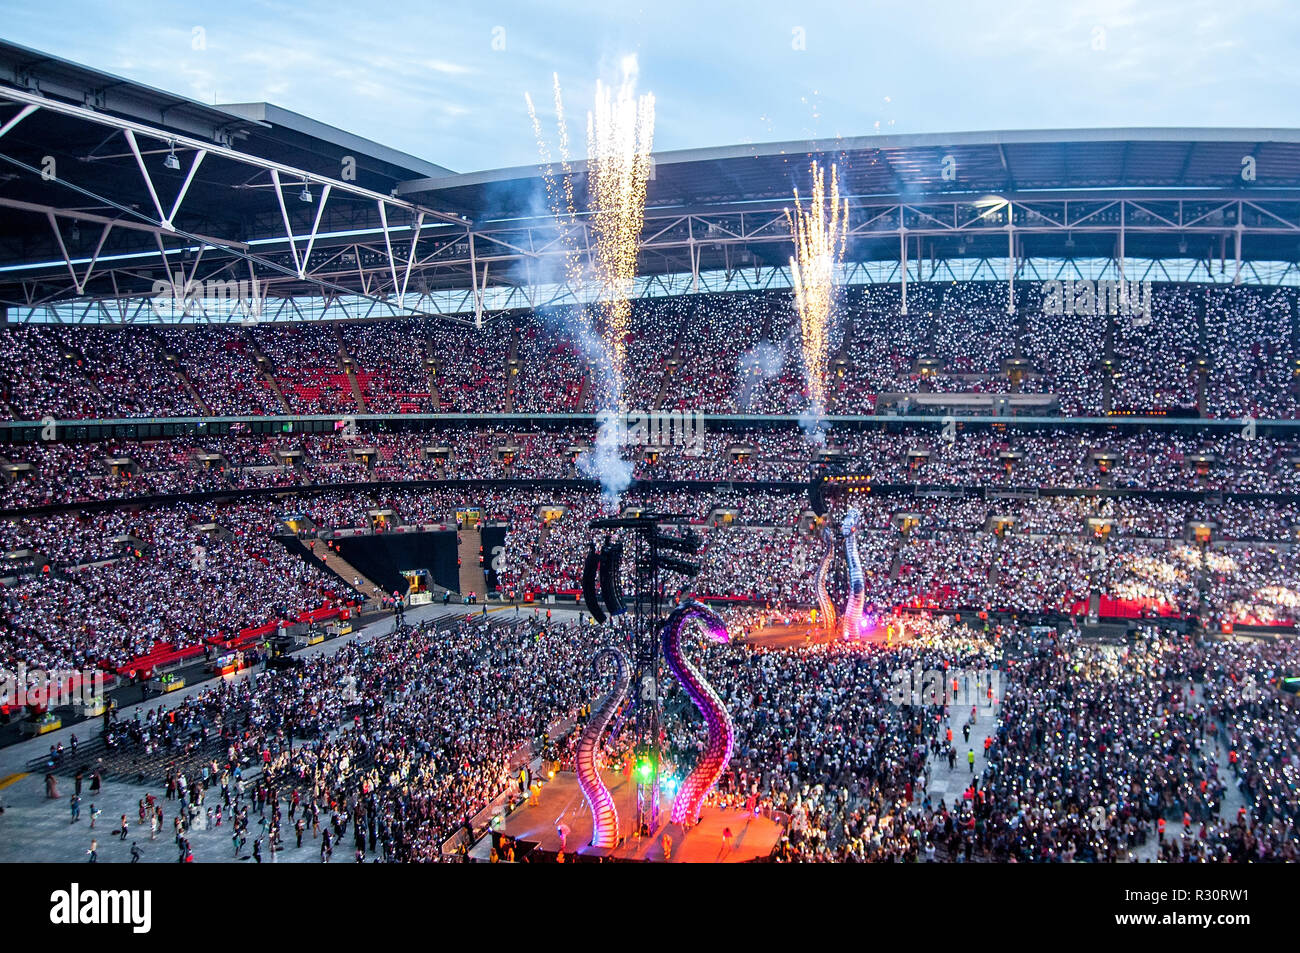 LONDON - JUN 23: Taylor Swift performs in concert at Wembley Stadium on June 23, 2018 in London, United Kingdom. Stock Photo